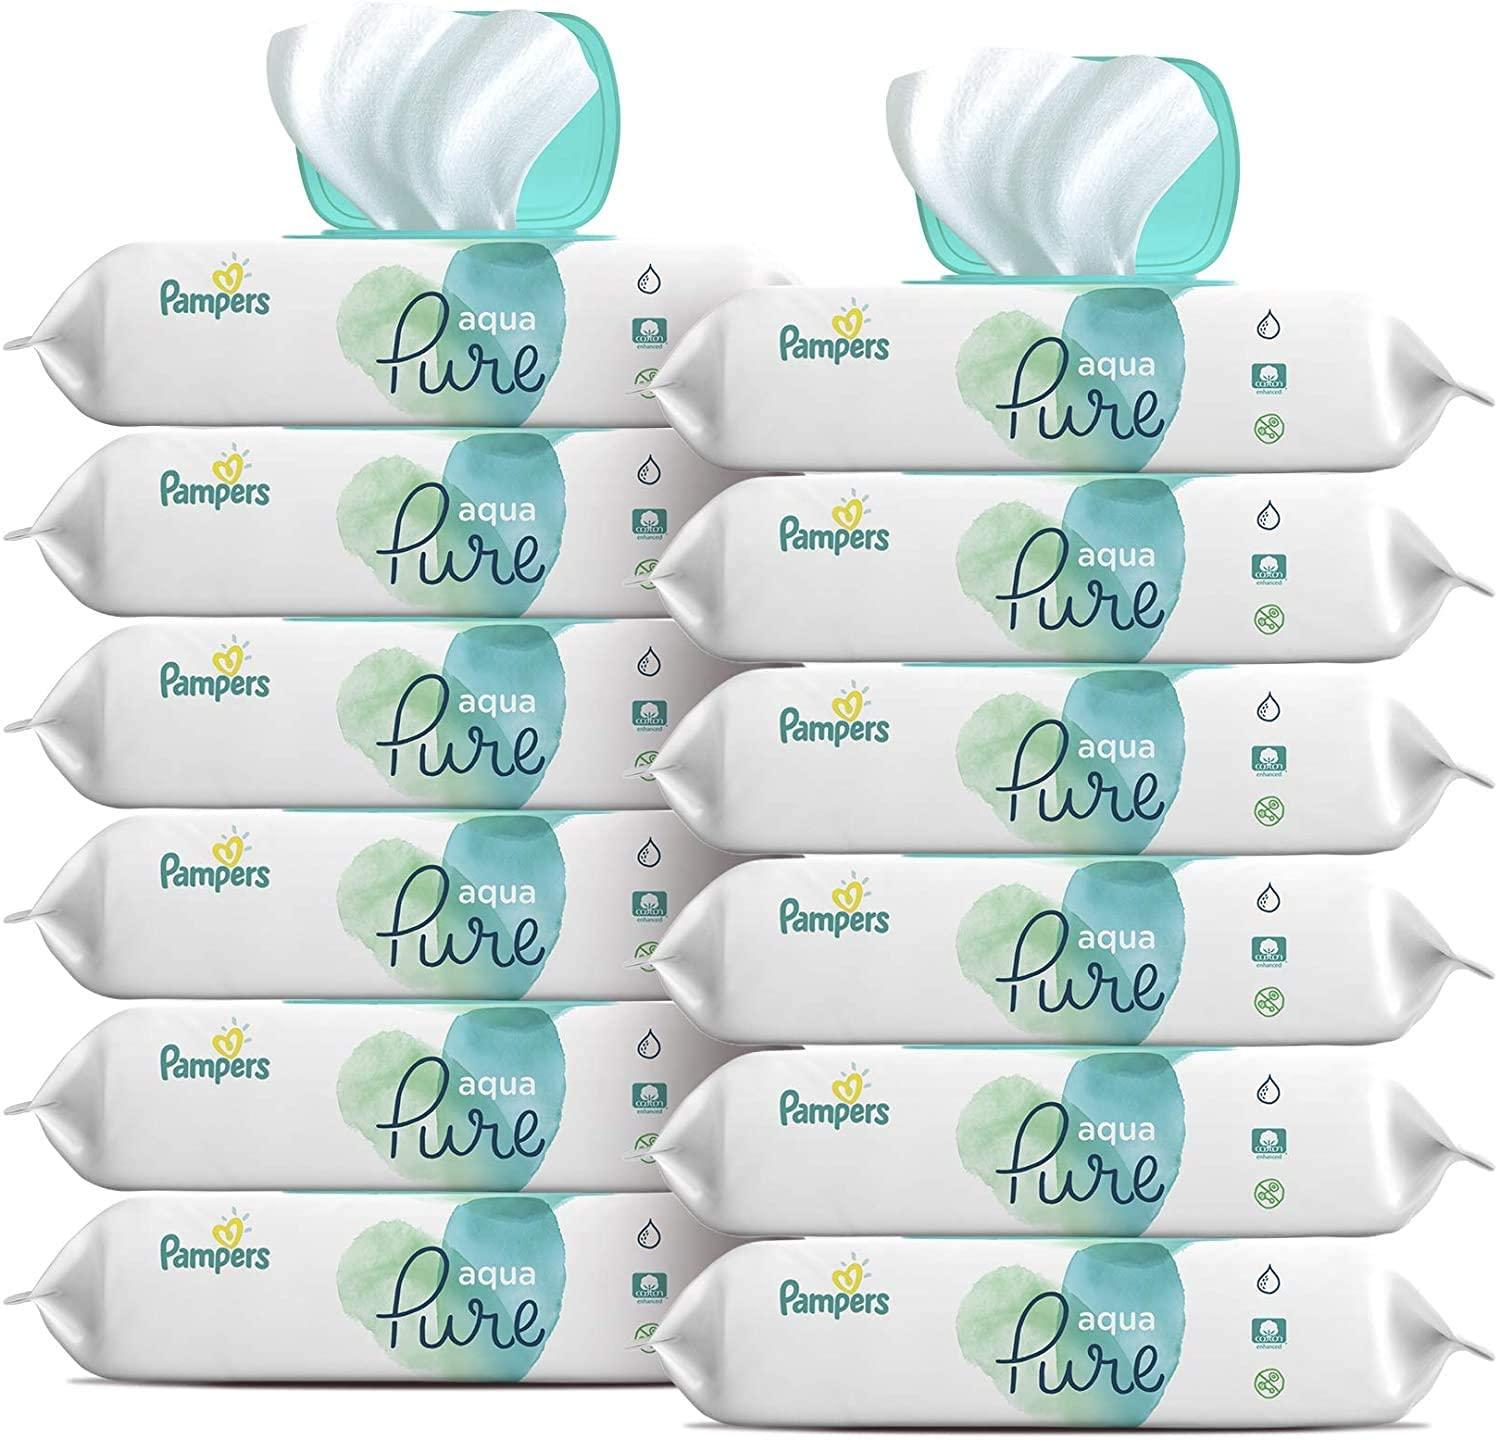 672 Pampers Aqua Pure Sensitive Water Baby Diaper Wipes for $15.36